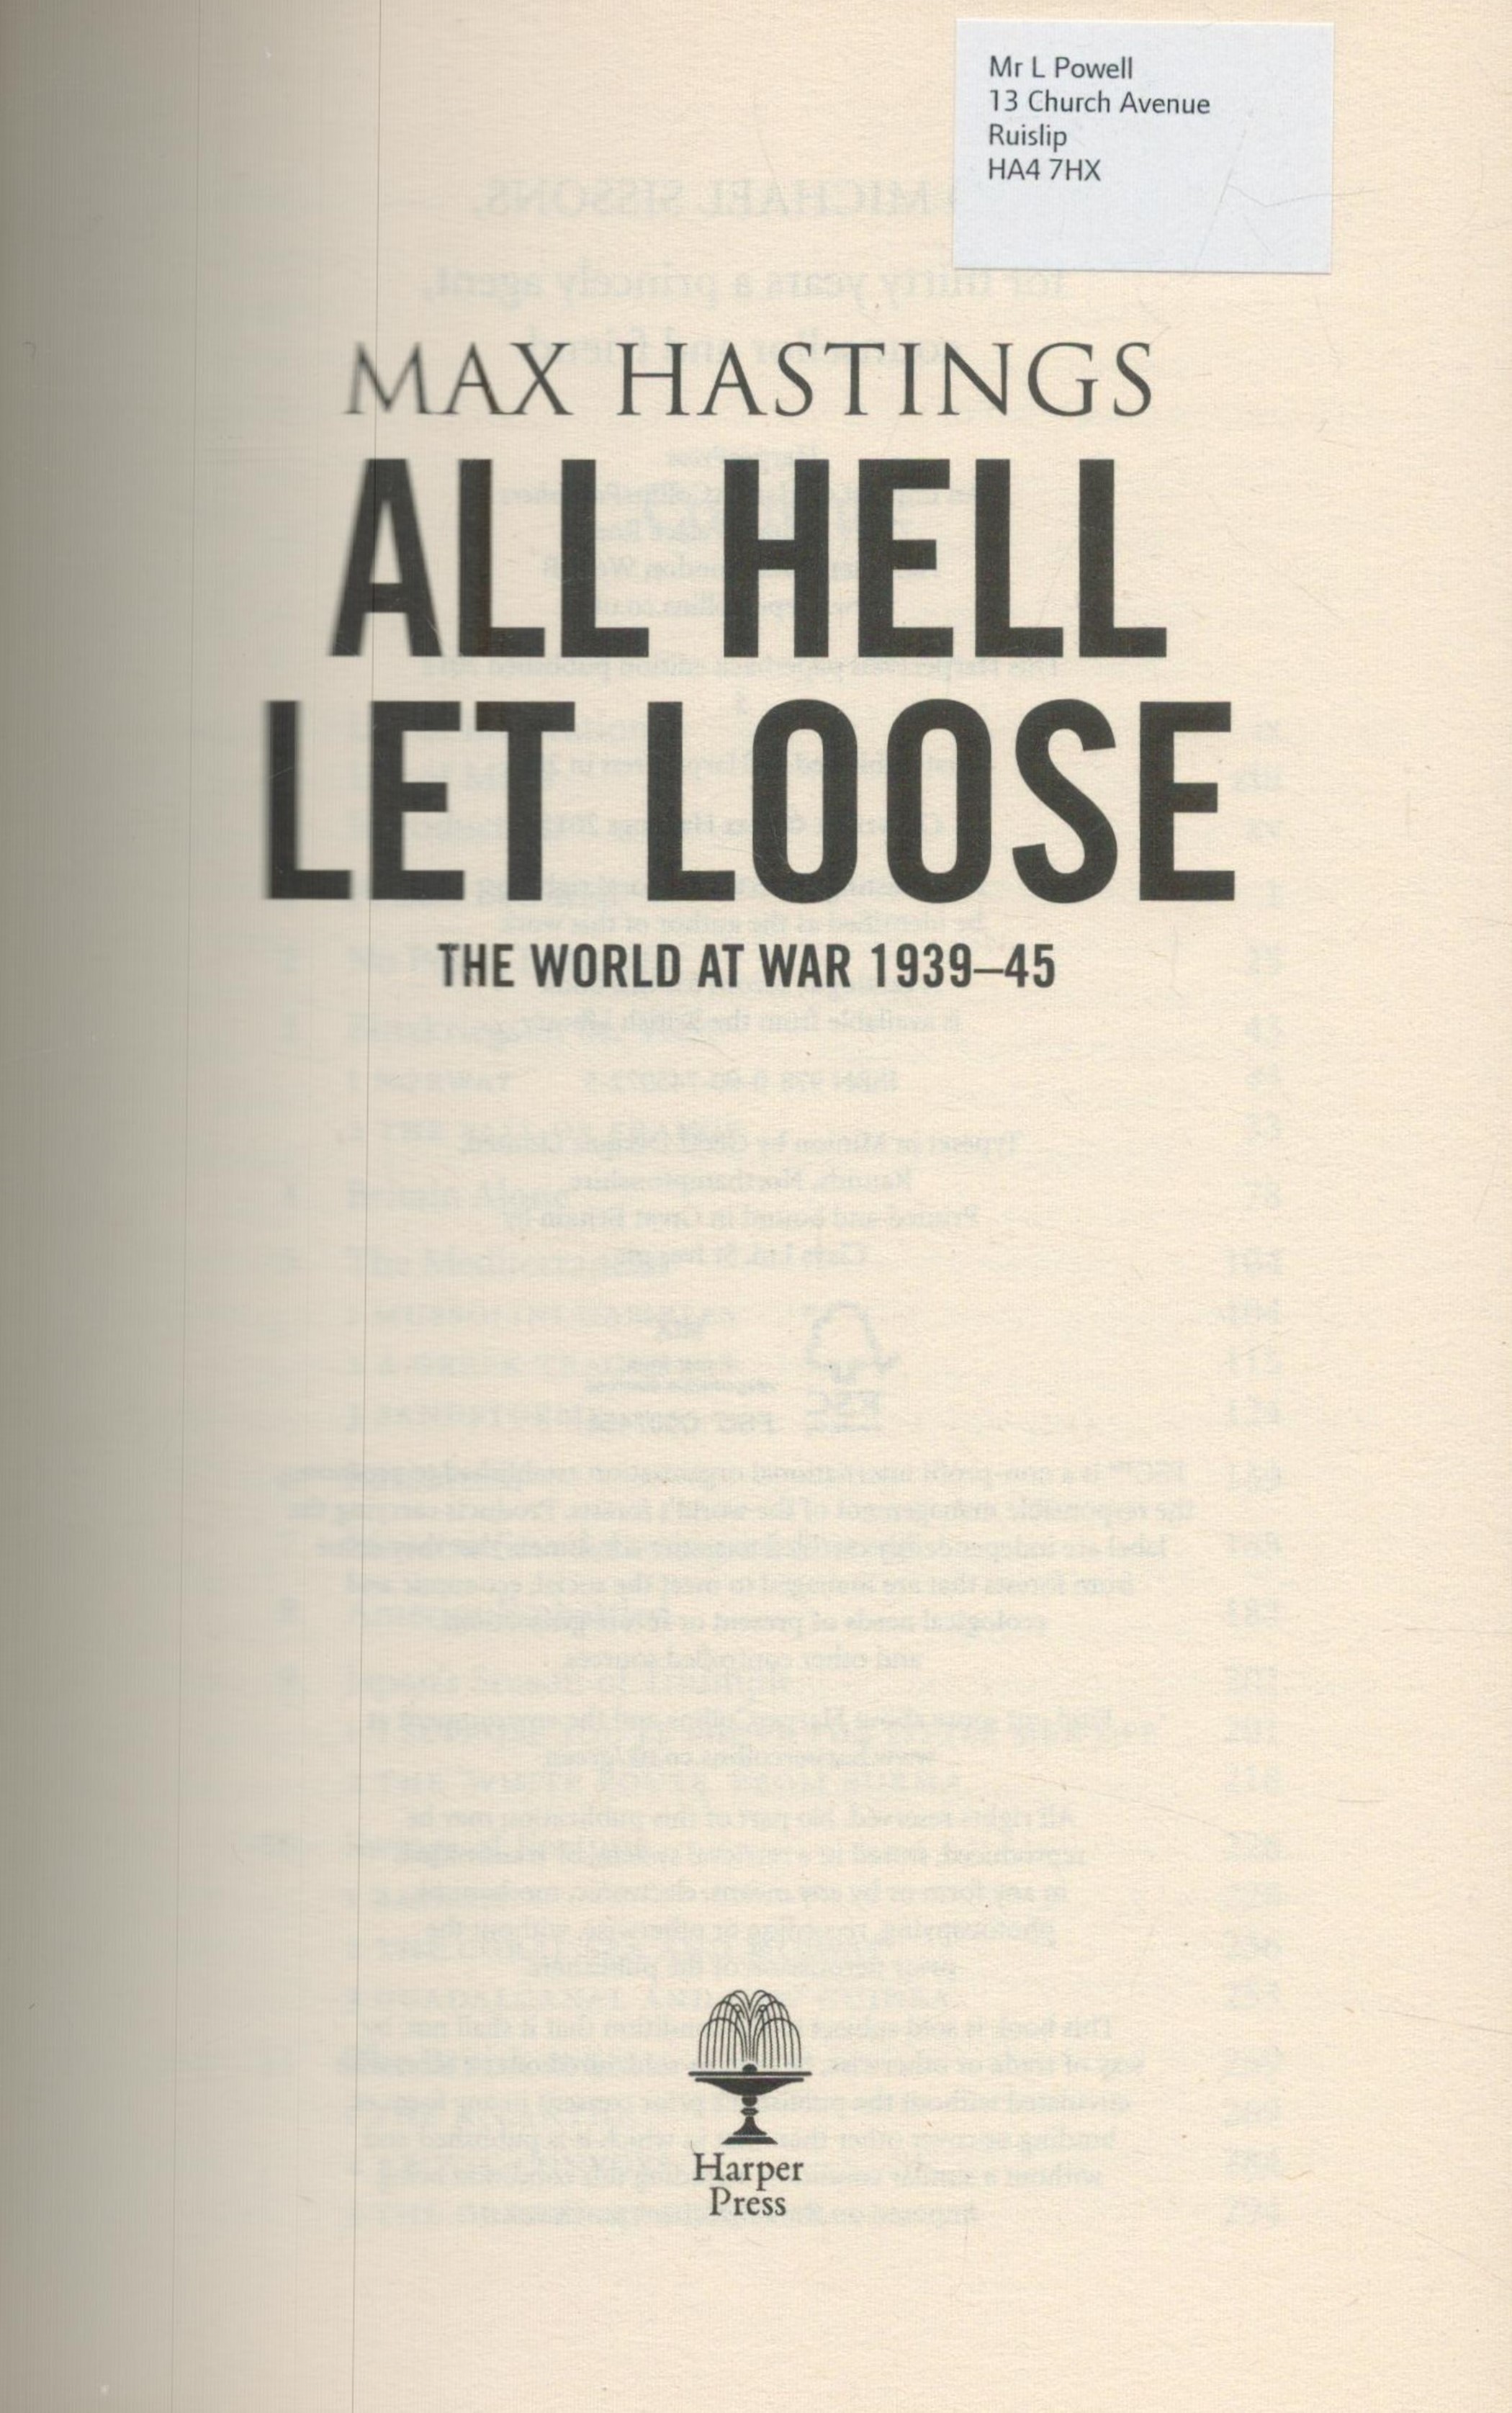 All Hell Let Loose - The World at War 1939-1945 by Max Hastings 2012 Softback Book with 748 pages - Image 2 of 3